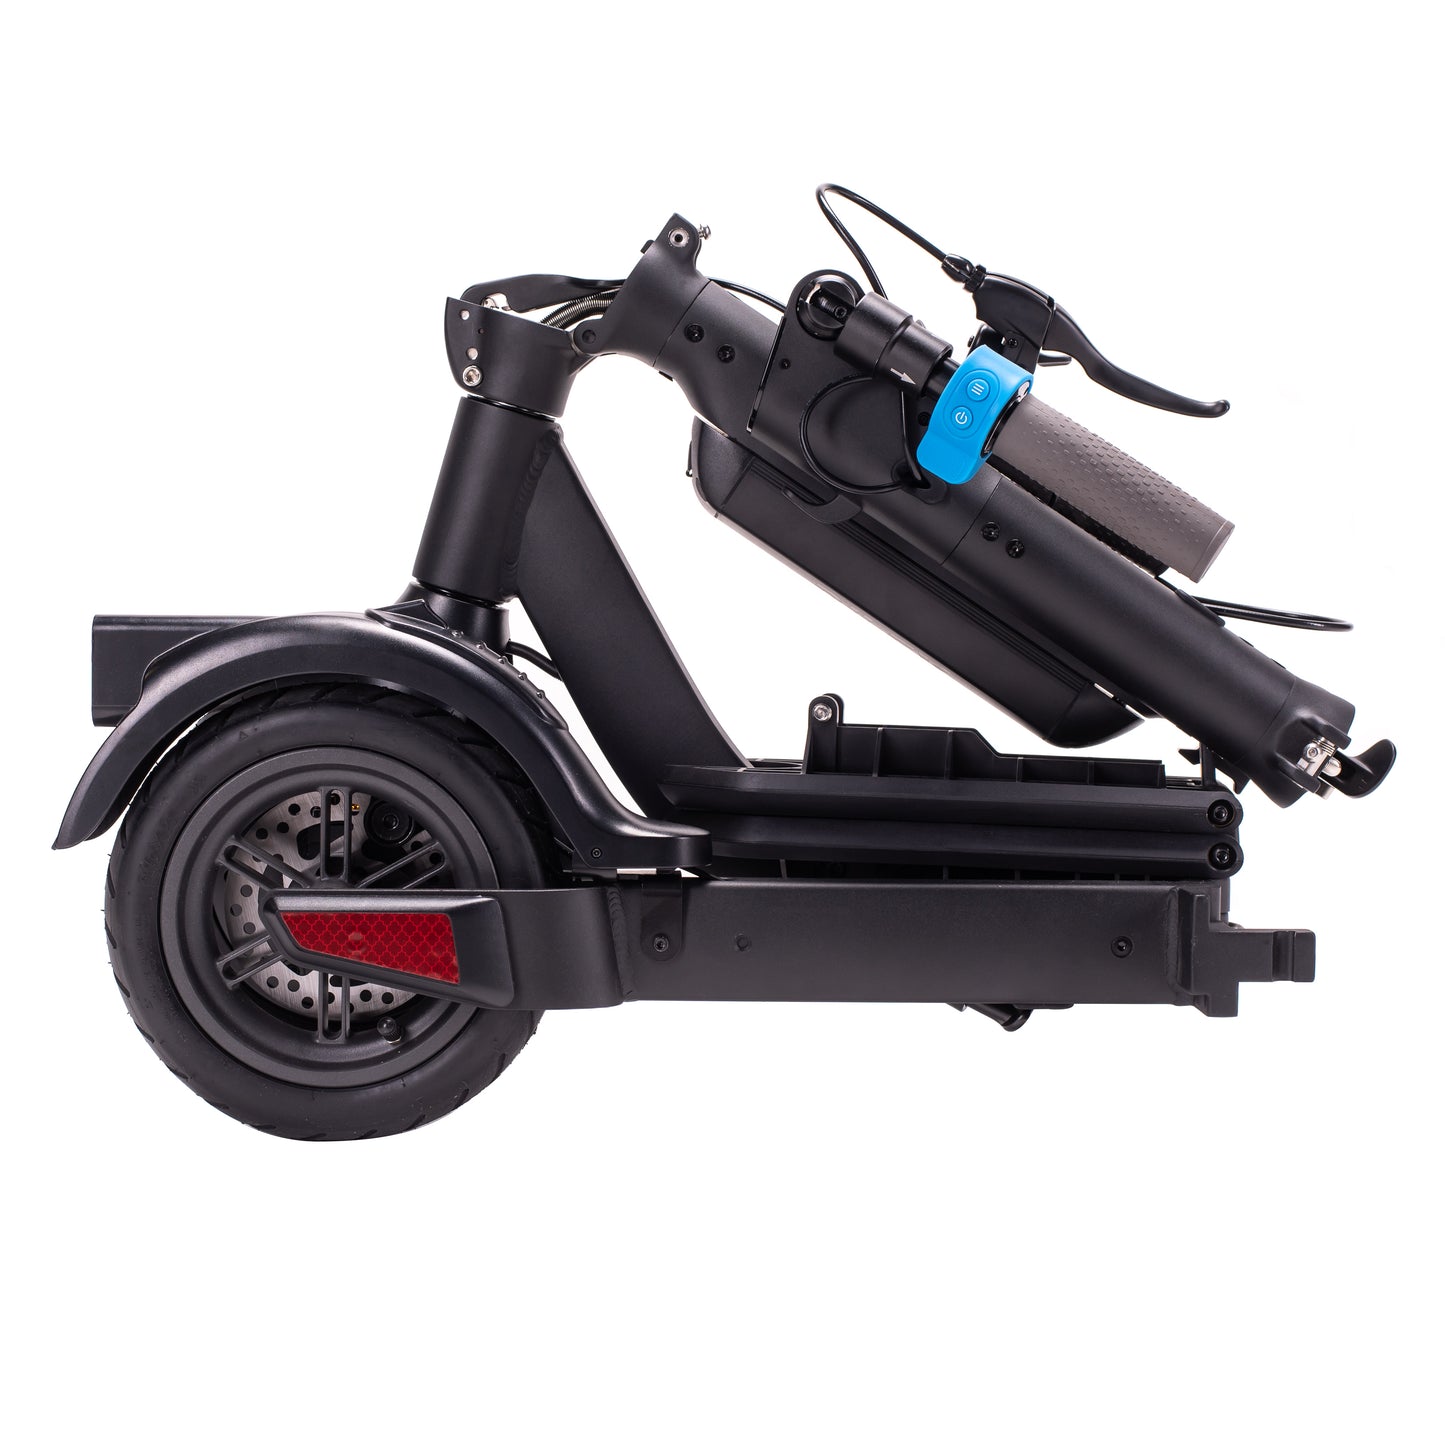 Riley RS3 25km Range 350W Motor Collapsible Electric Scooter